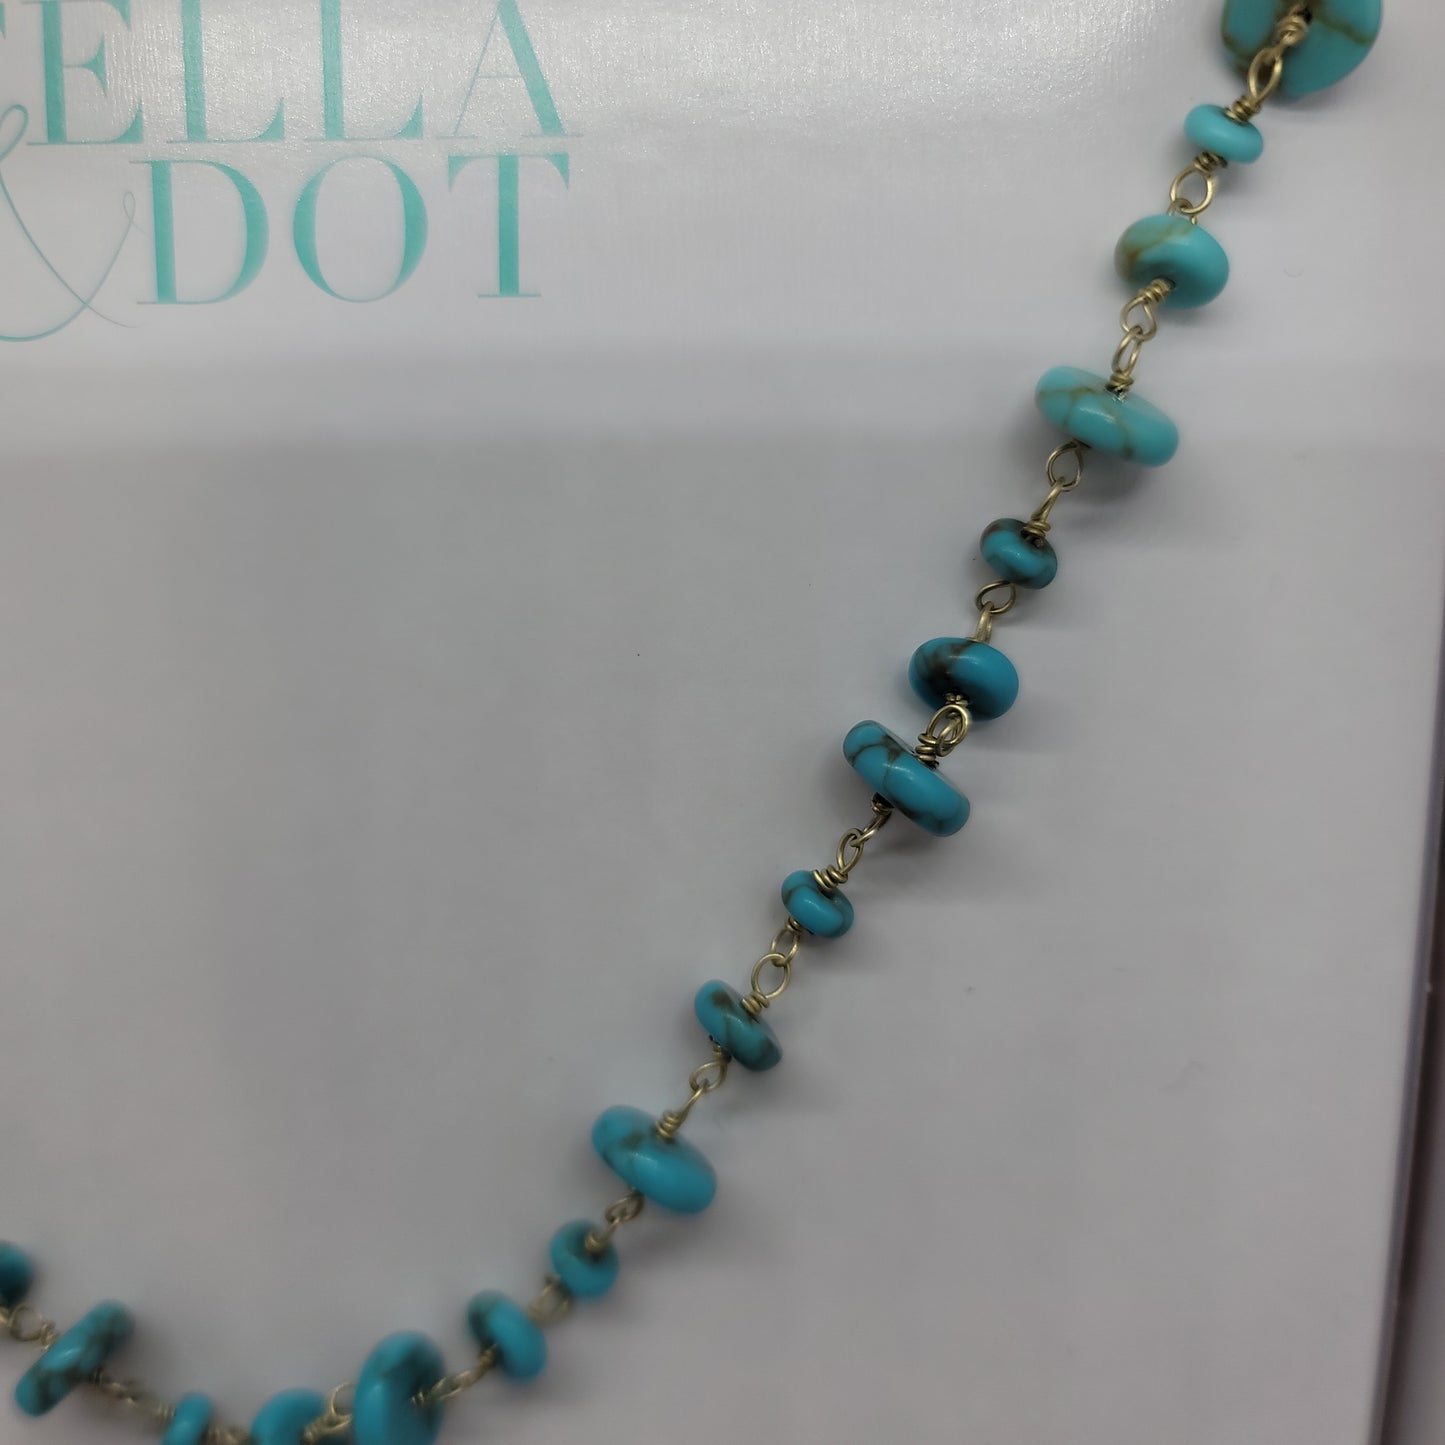 Modern Bohemian ombre layering necklace - turquoise - by Stella & Dot